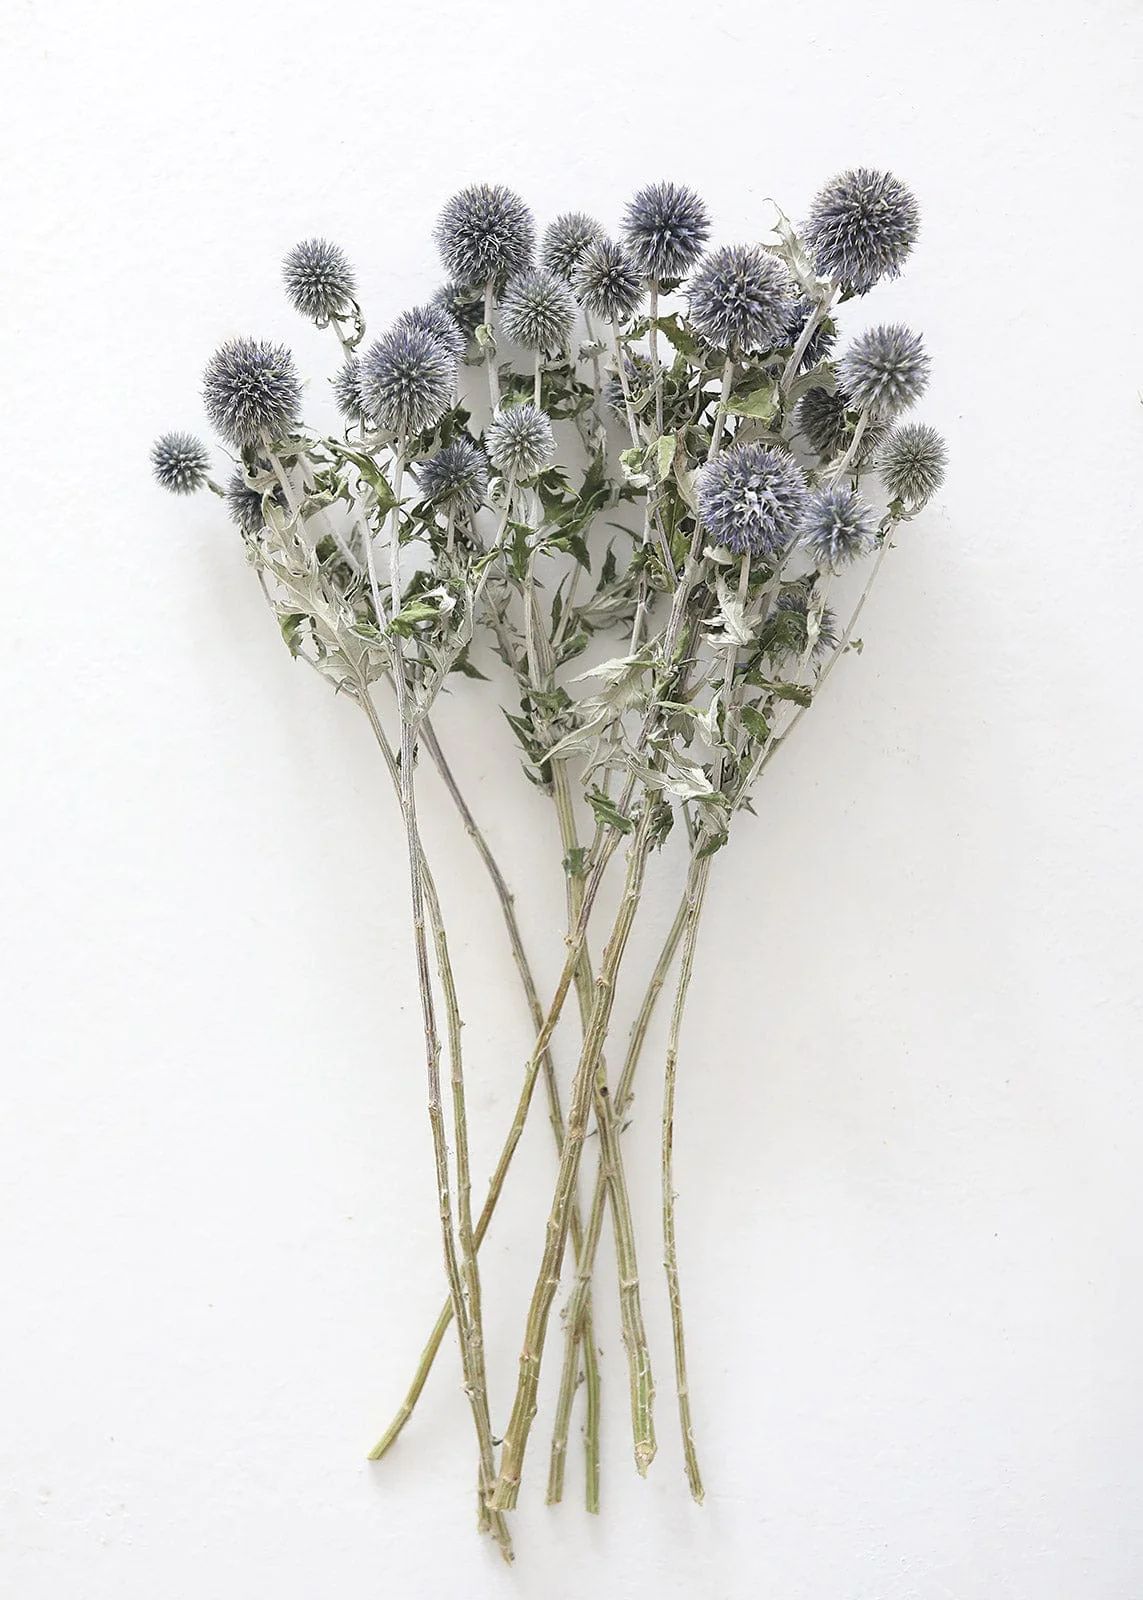 Blue Globe Thistle | Dried Flowers & Wildflowers at Afloral.com | Afloral